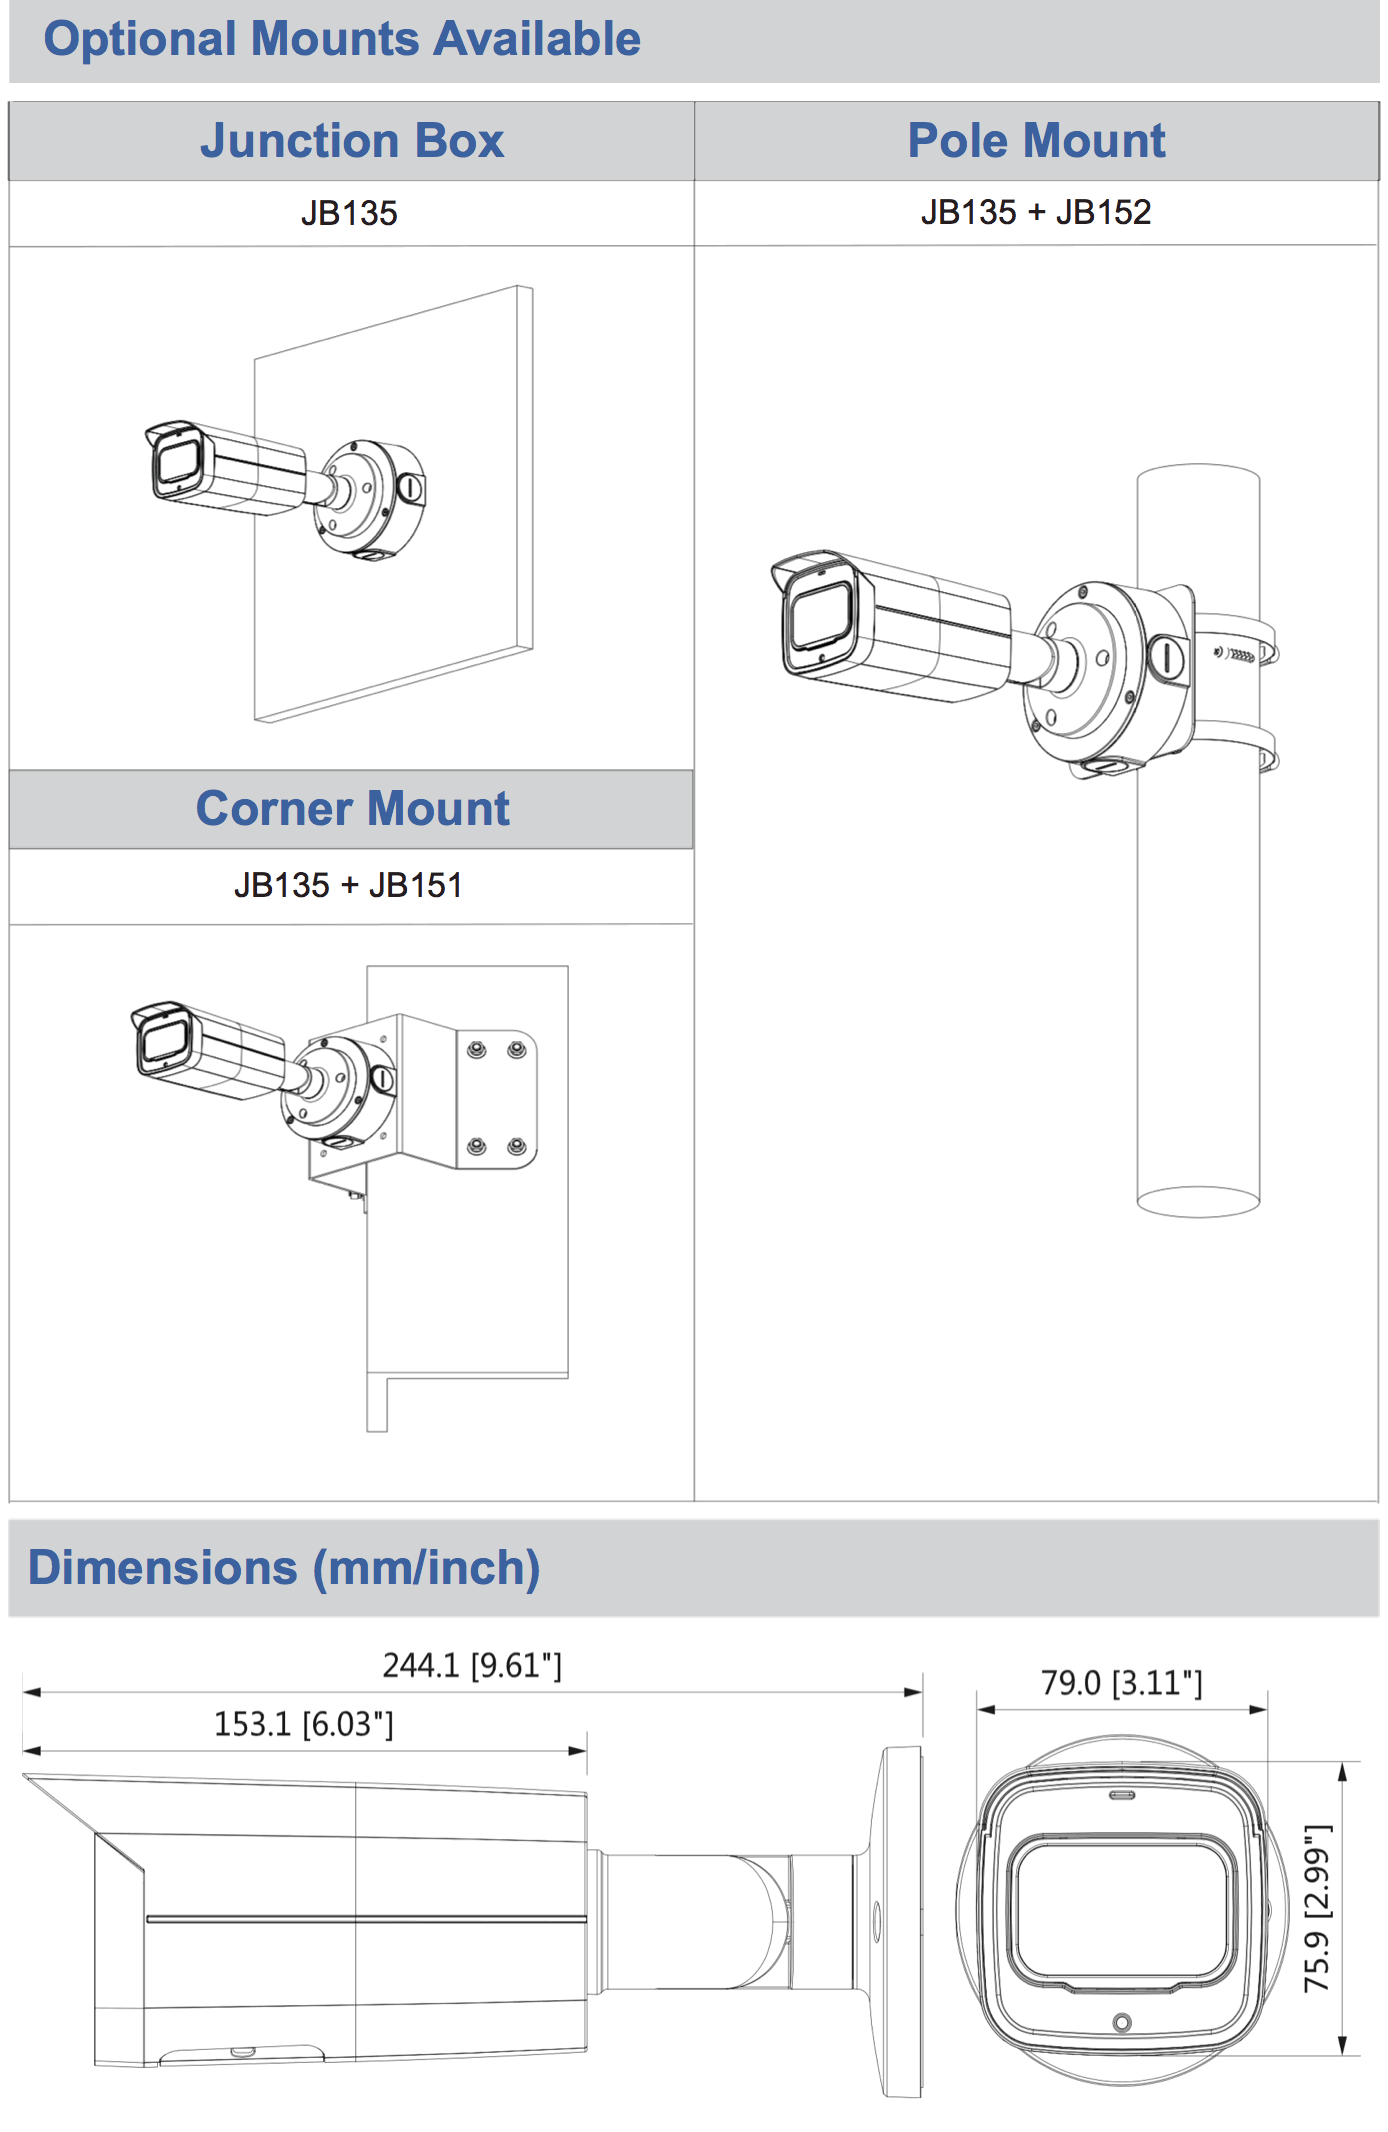 images of optional mounting options